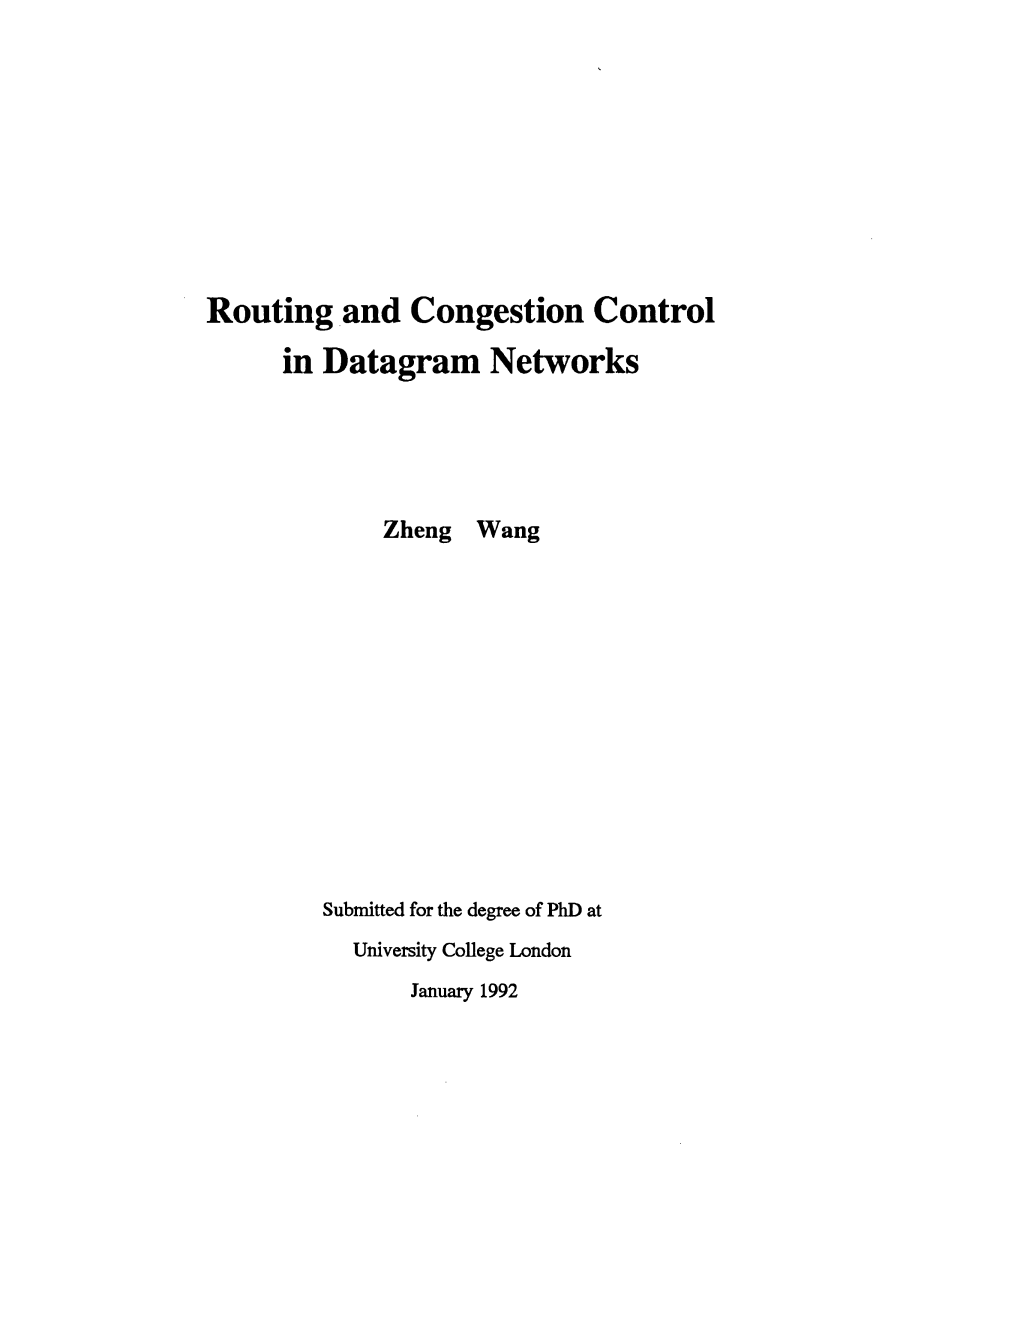 Routing and Congestion Control in Datagram Networks